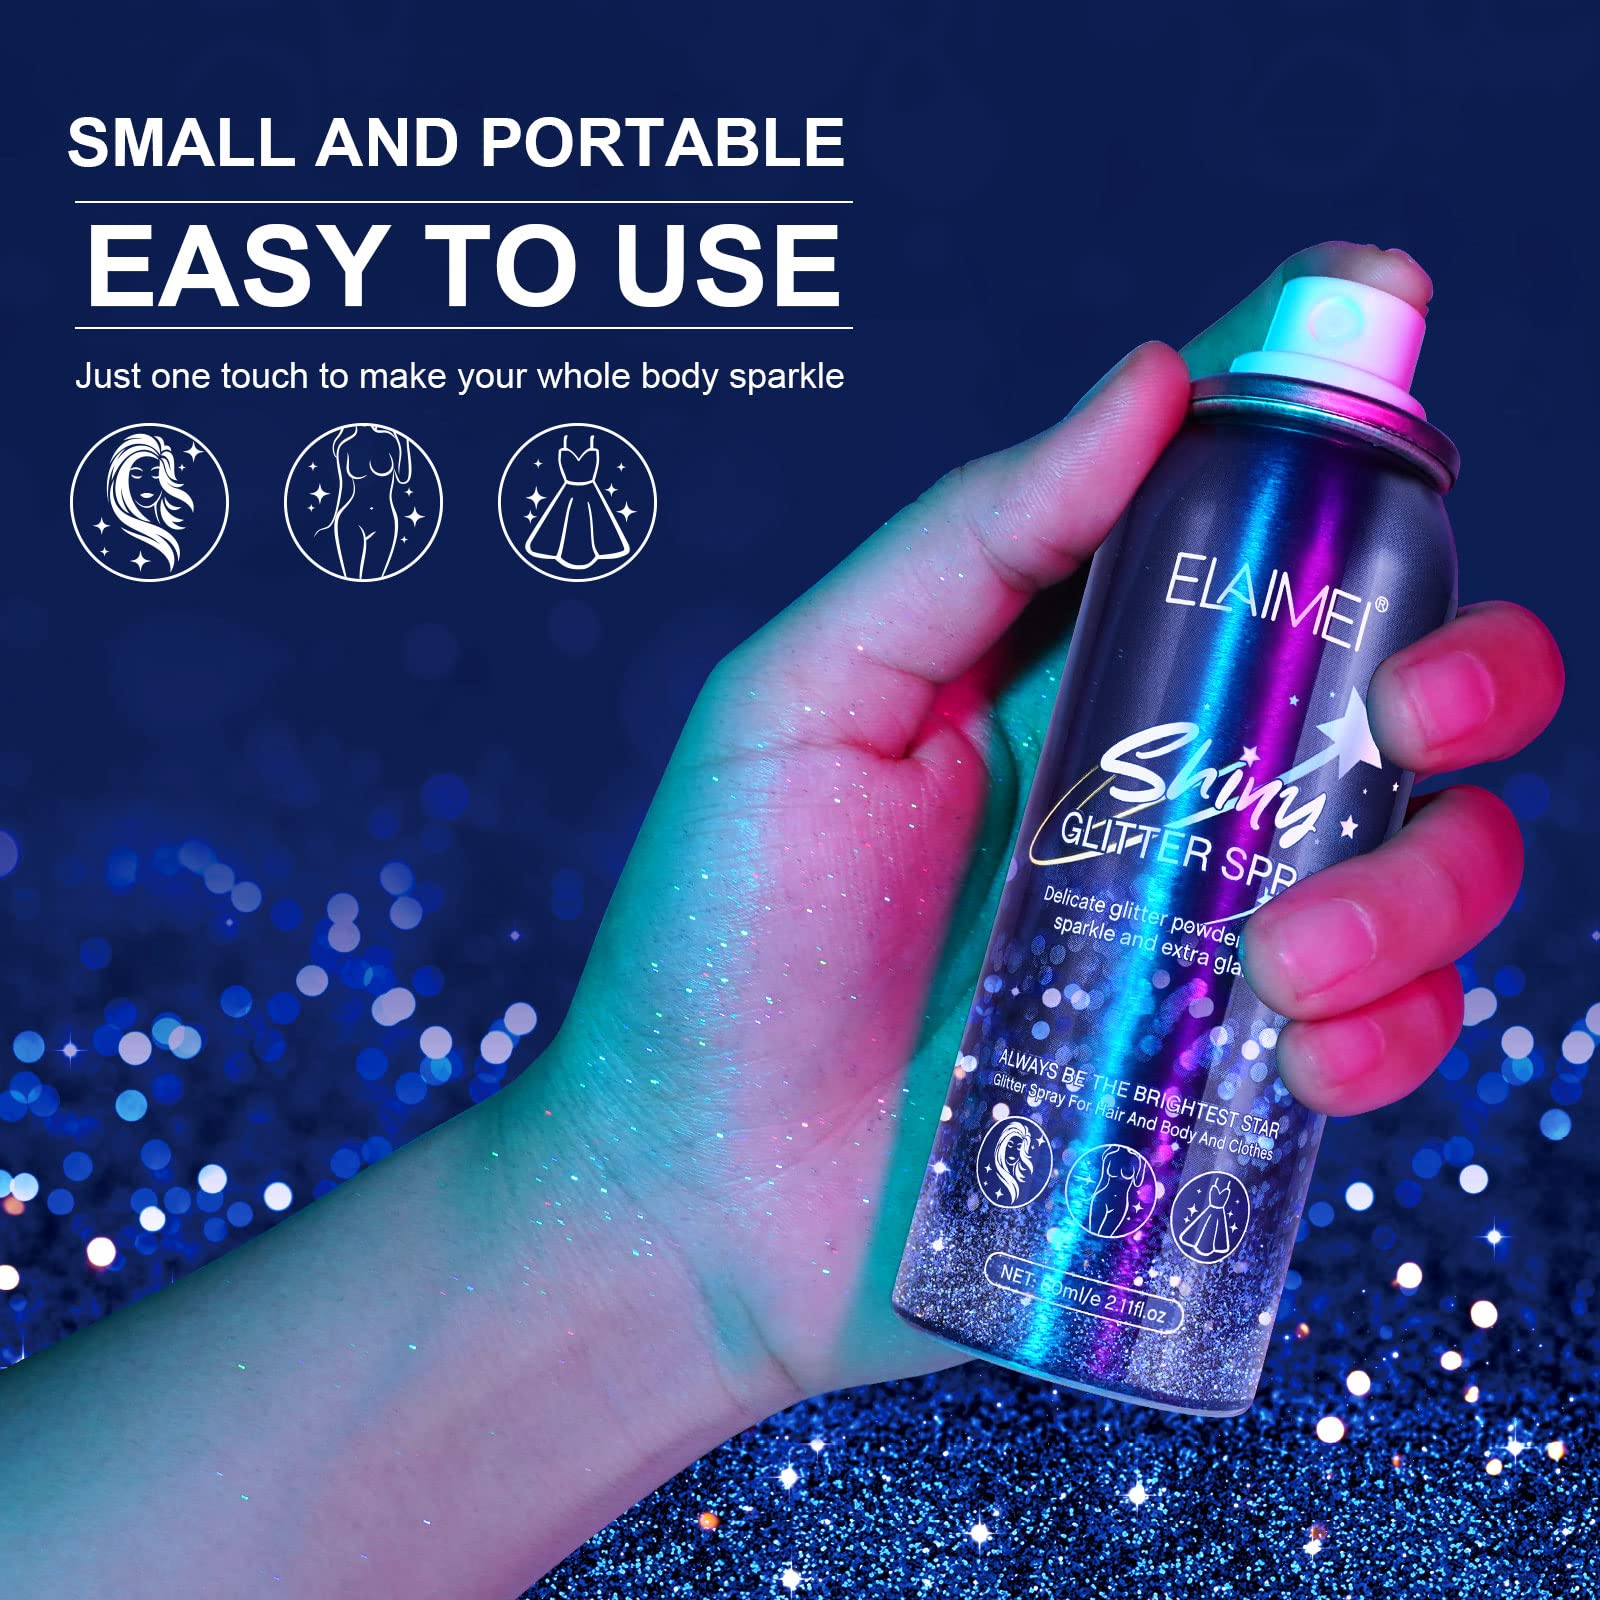 Body Glitter Spray, Glitter Spray for Hair and Body, Quick-Drying Waterproof Glitter Hairspray Highlighter Face Makeup Spray for Prom, Festival Rave, Party, Stage Makeup, Christmas Gifts